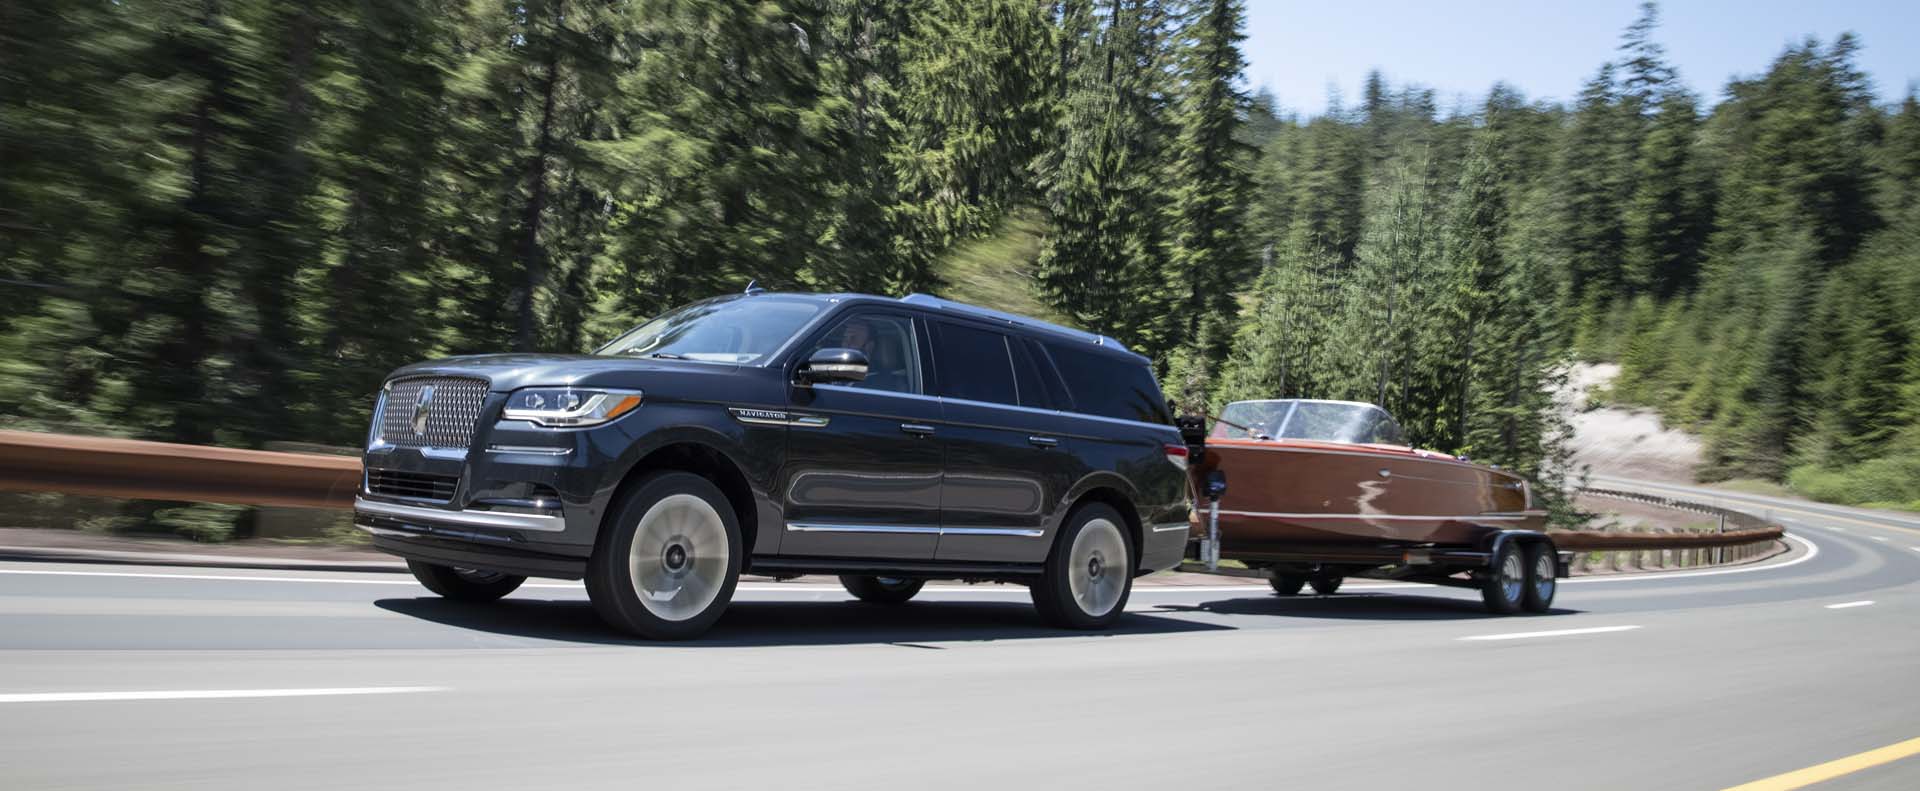 Report: Ford broadens plan for Lincoln EVs—including electric NavigatorReport: Ford broadens plan for Lincoln EVs—including electric Navigator